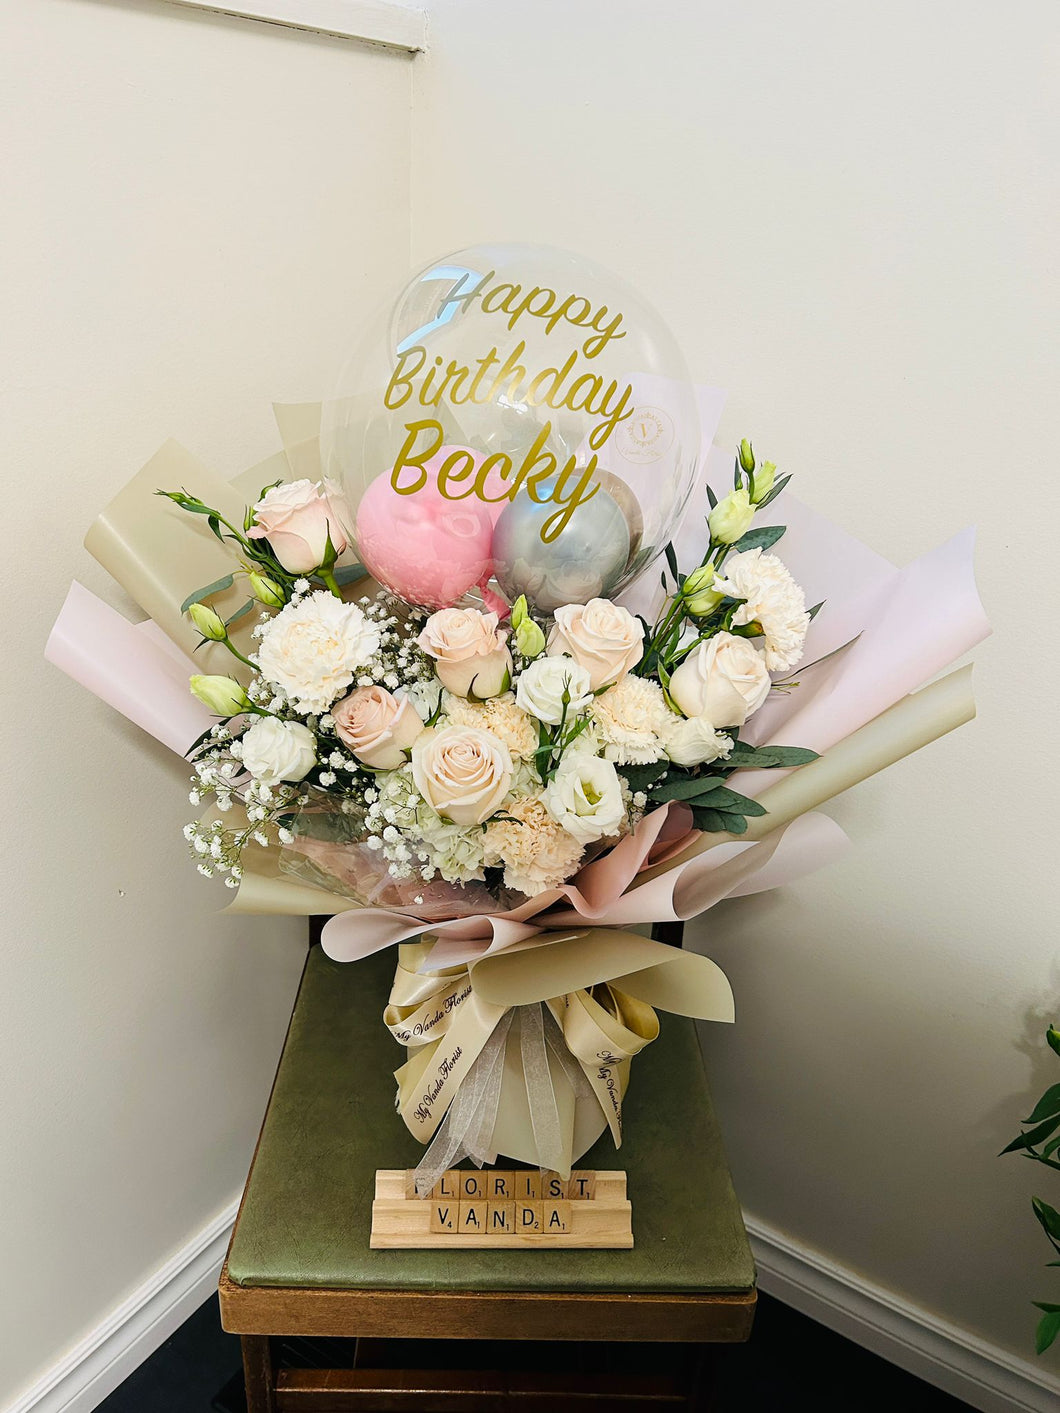 Floral bouquet with 10” balloon